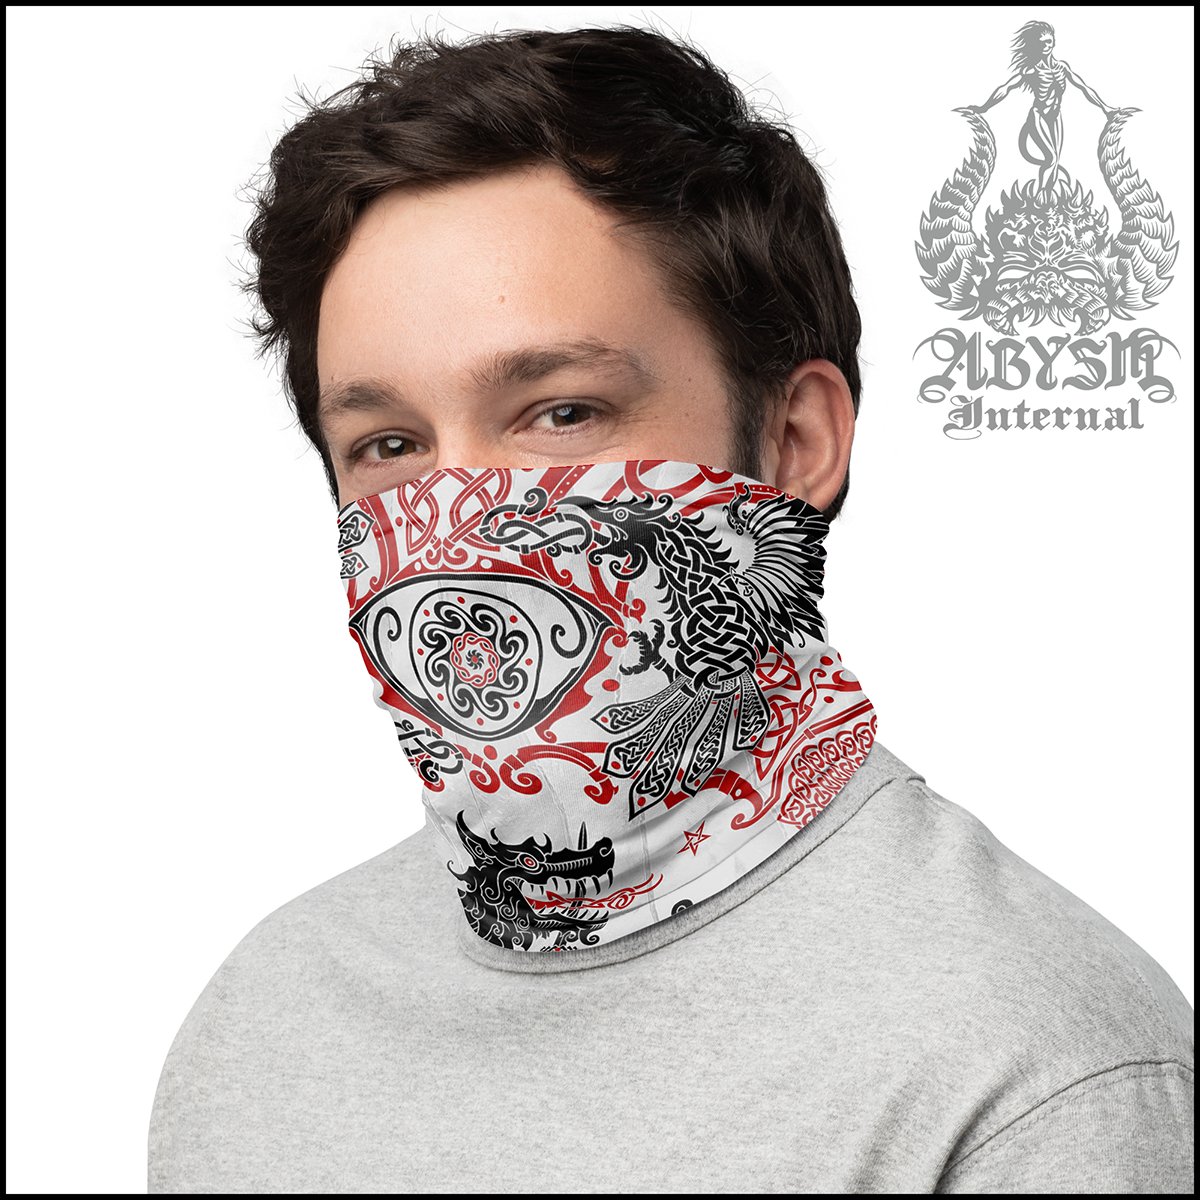 Fenrir Neck Gaiter, Norse Wolf Face Mask, Viking Printed Head Covering, Nordic Art - Black, White and Red, 2 Colors - Abysm Internal